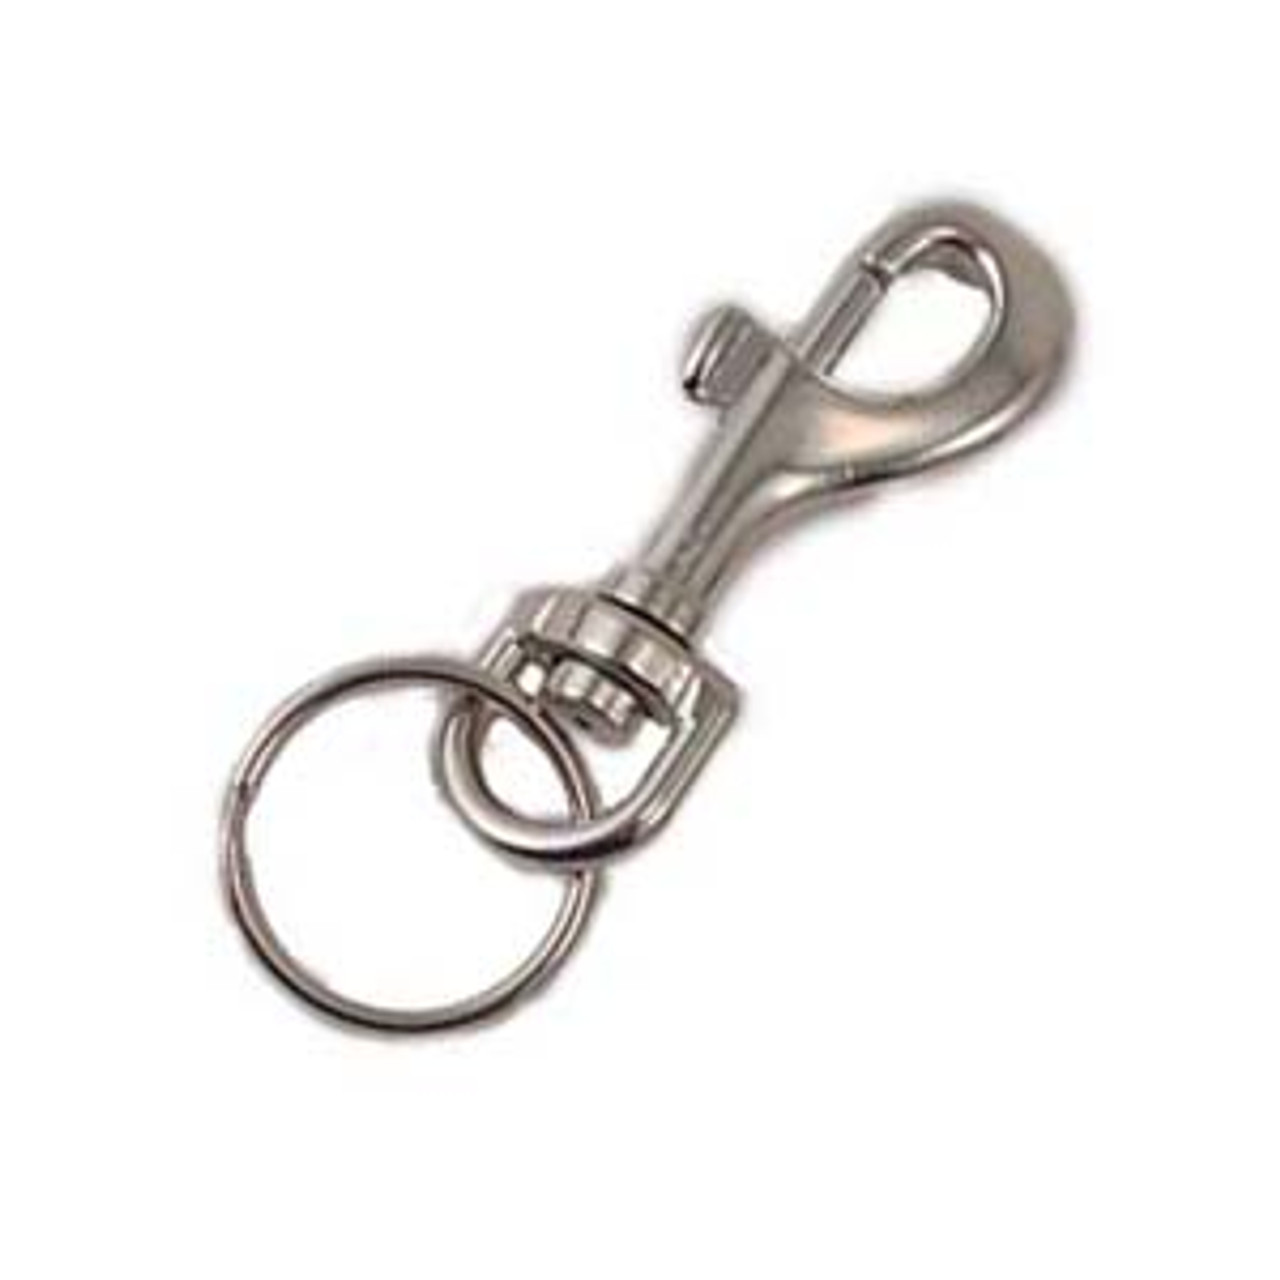 Shop for and Buy Heavy Duty Small Snap Clip Key Ring Nickel Plated